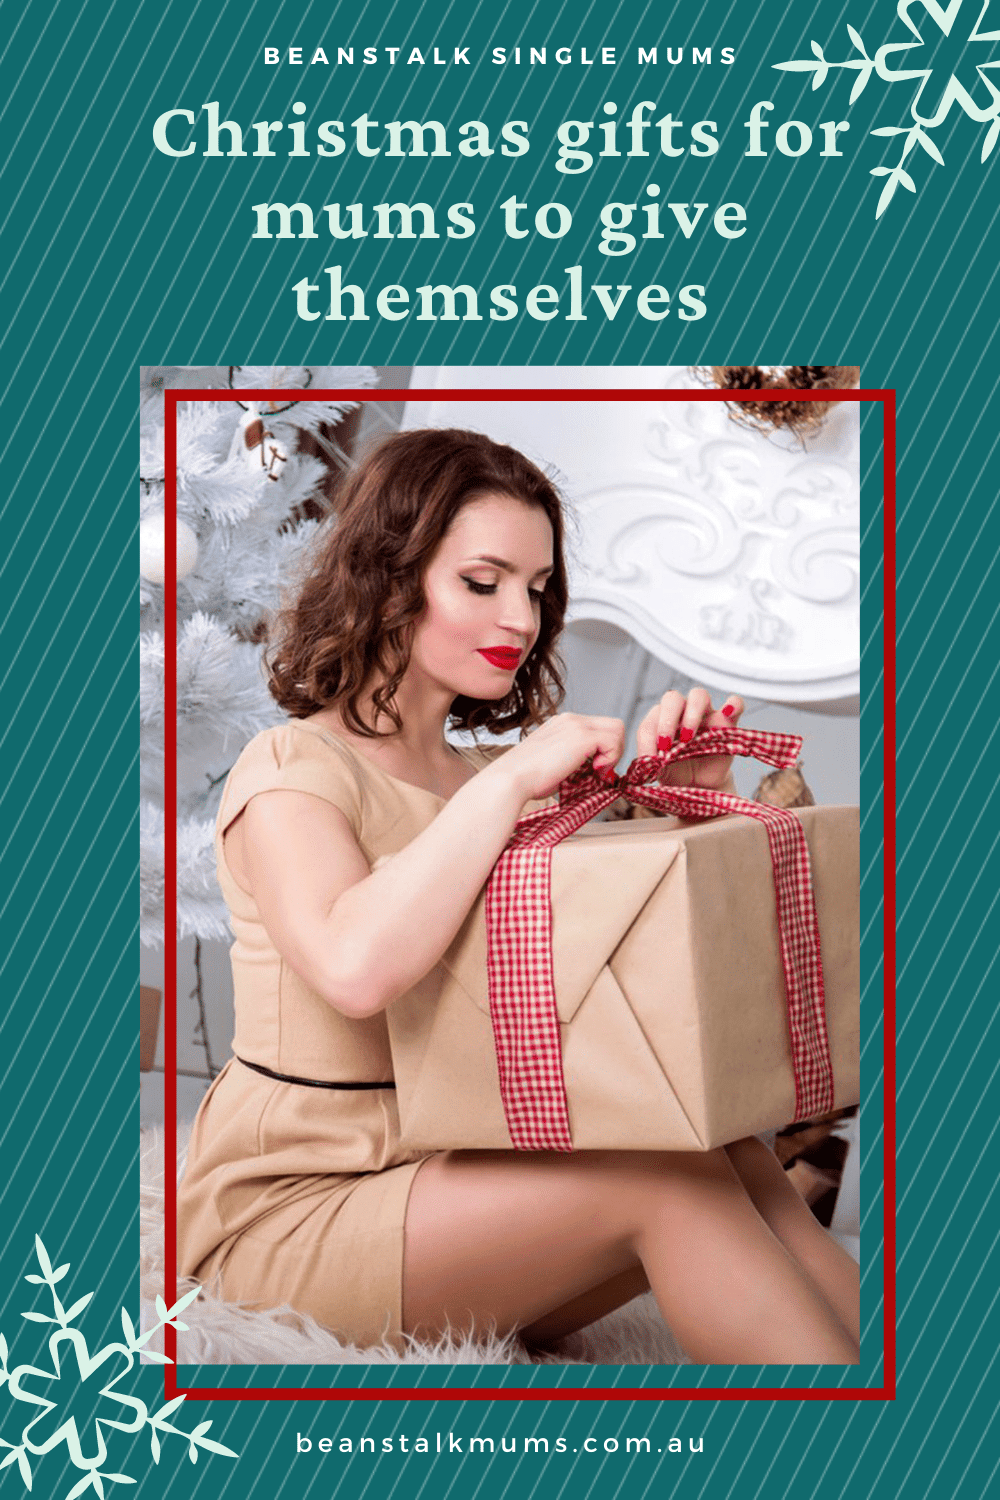 Christmas gifts mums give themselves | Beanstalk Single Mums Pinterest